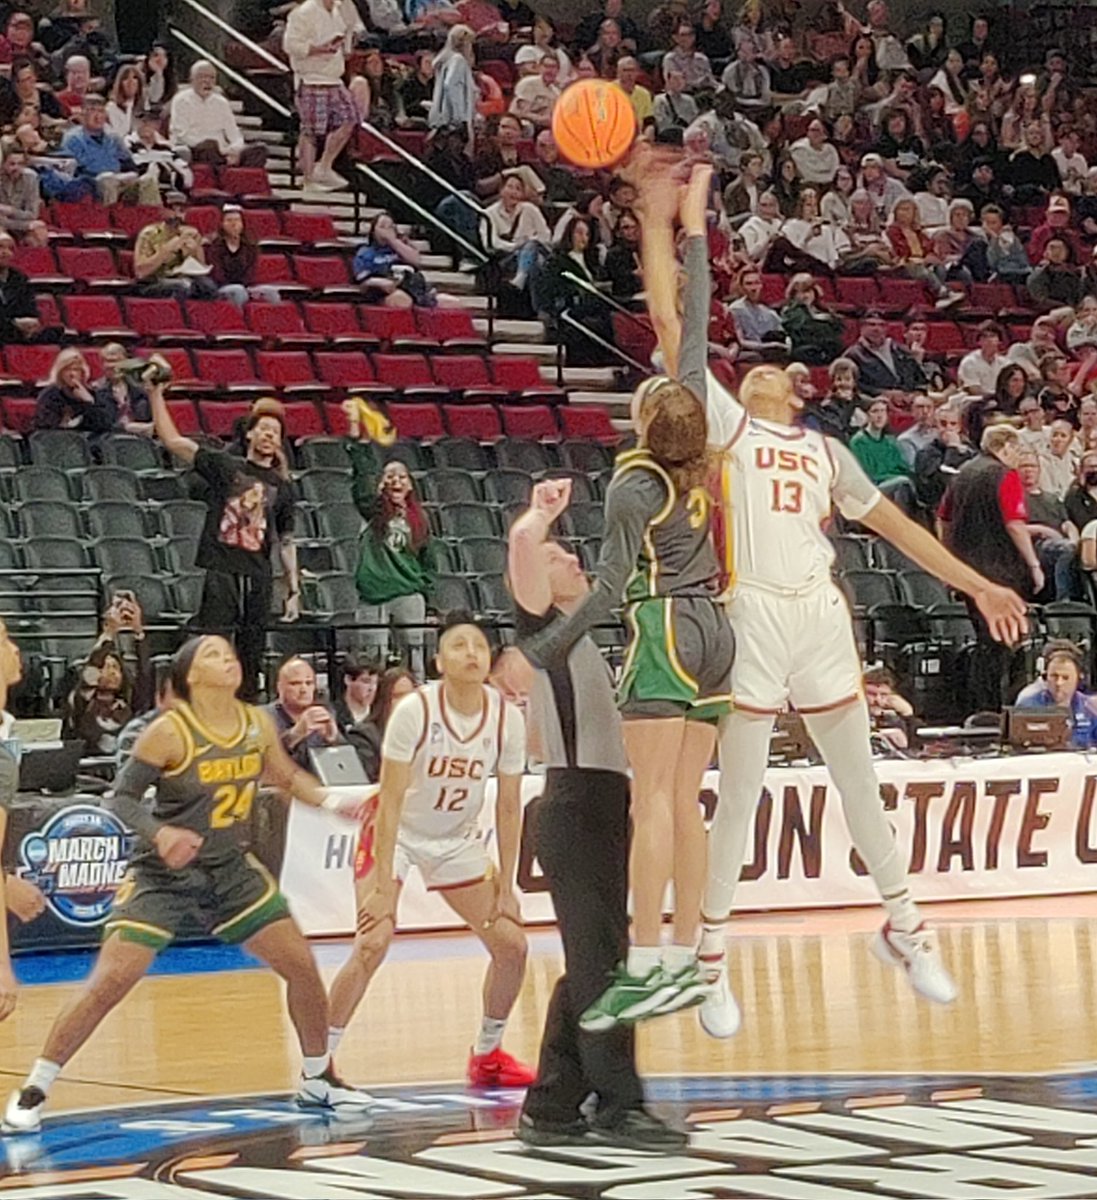 USC defeated Baylor 74-70 in the #Sweet16 in Portland in a closely contested game to advance to the regional finals JuJu Watkins didn't have her most efficient game, shooting 8-of-28 (2-of-11 on 3s), but converted a 3-point play to break a late tie. She scored 9 straight points